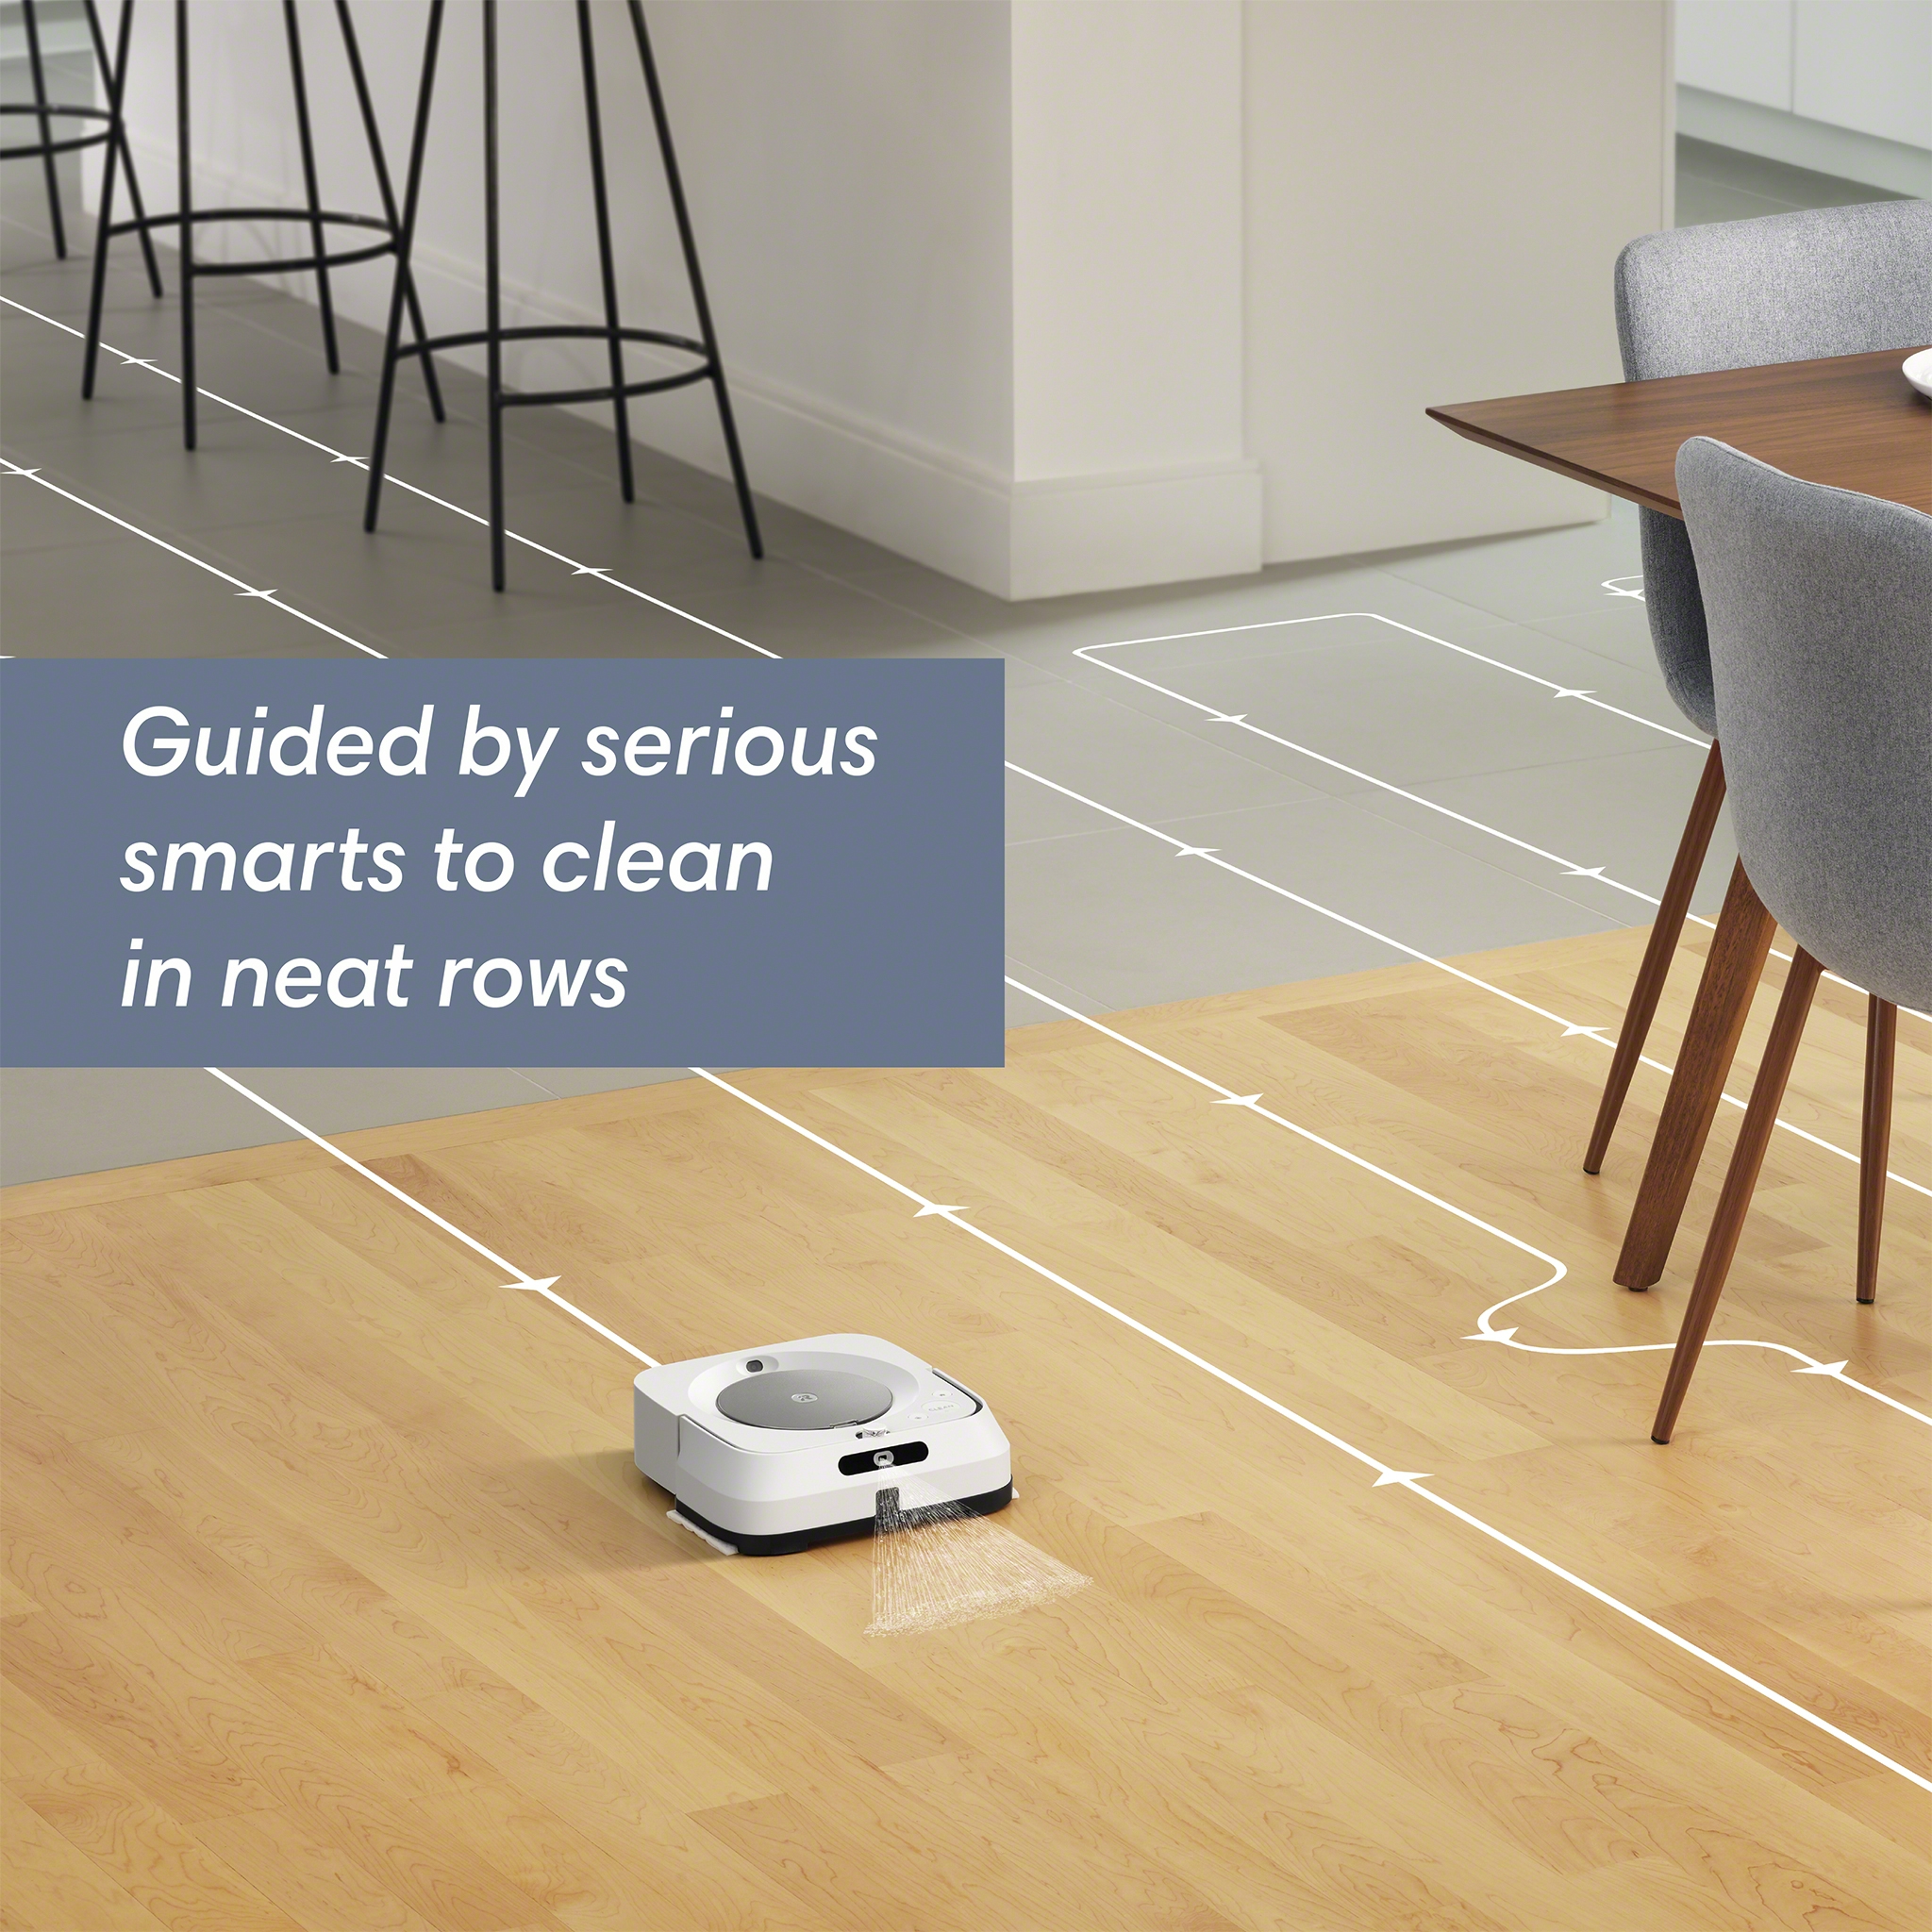 iRobot Braava Jet M6 (6110) Ultimate Robot Mop- Wi-Fi Connected, Precision Jet Spray, Smart Mapping, Works with Google Home, Ideal for Multiple Rooms, Recharges and Resumes - image 7 of 23